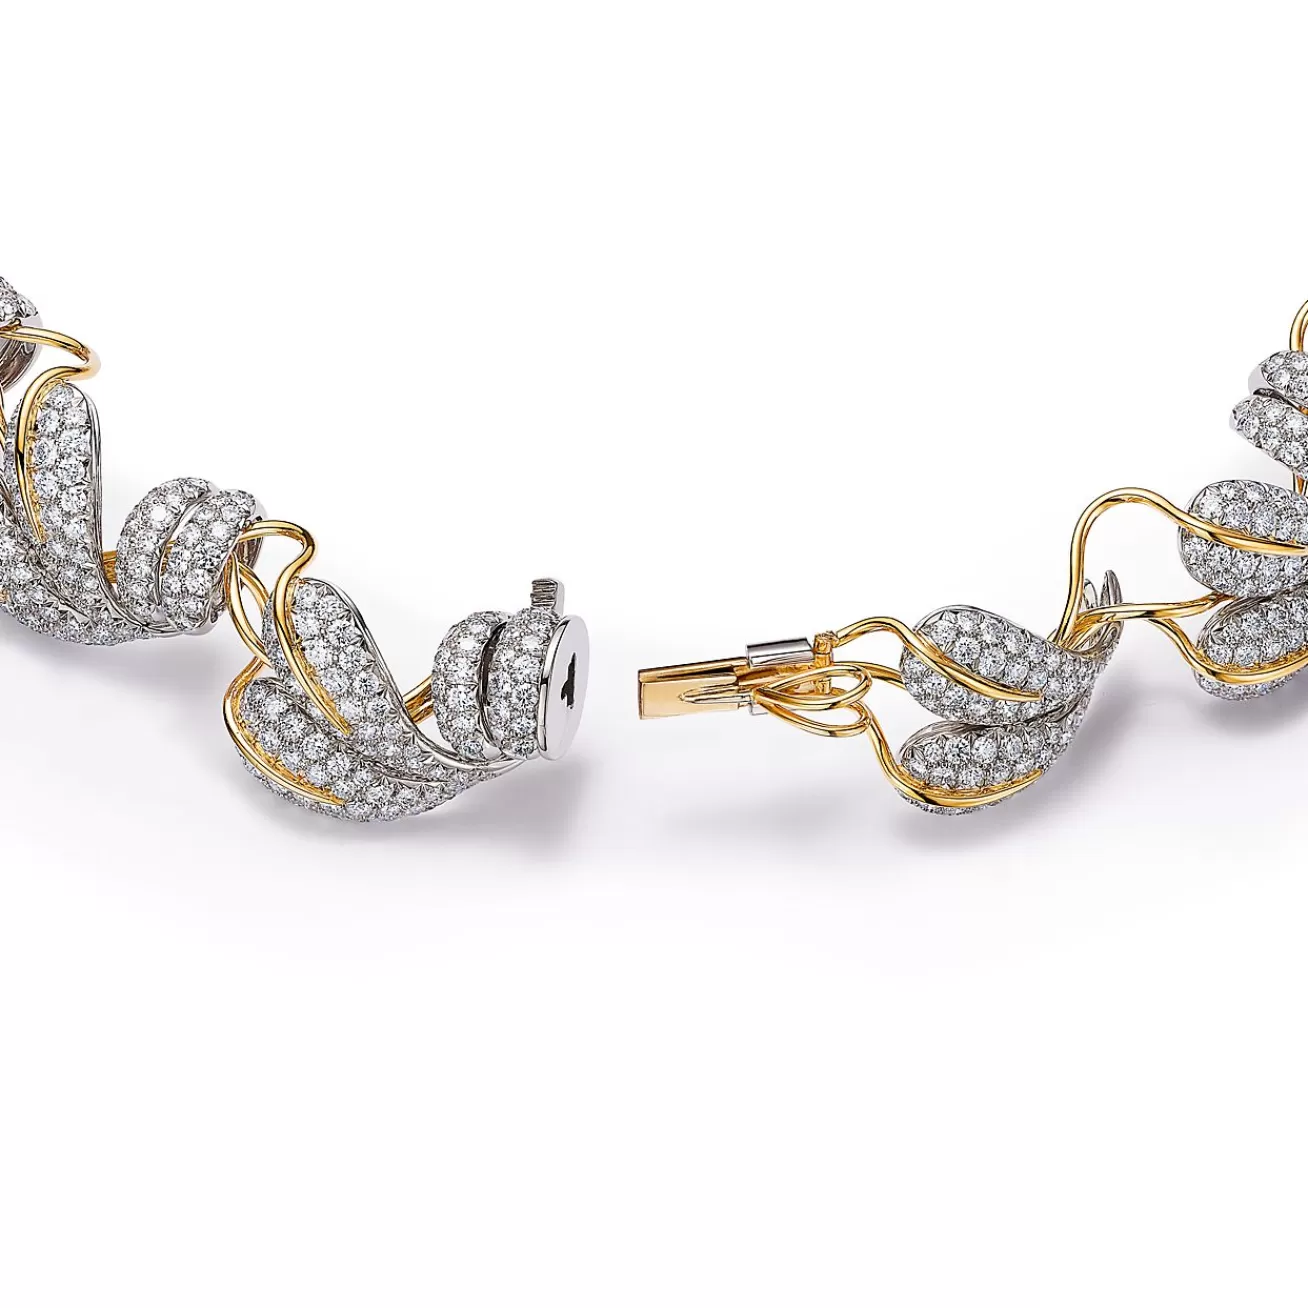 Tiffany & Co. Necklace in Platinum and Yellow Gold with Diamonds | ^ Necklaces & Pendants | Gold Jewelry